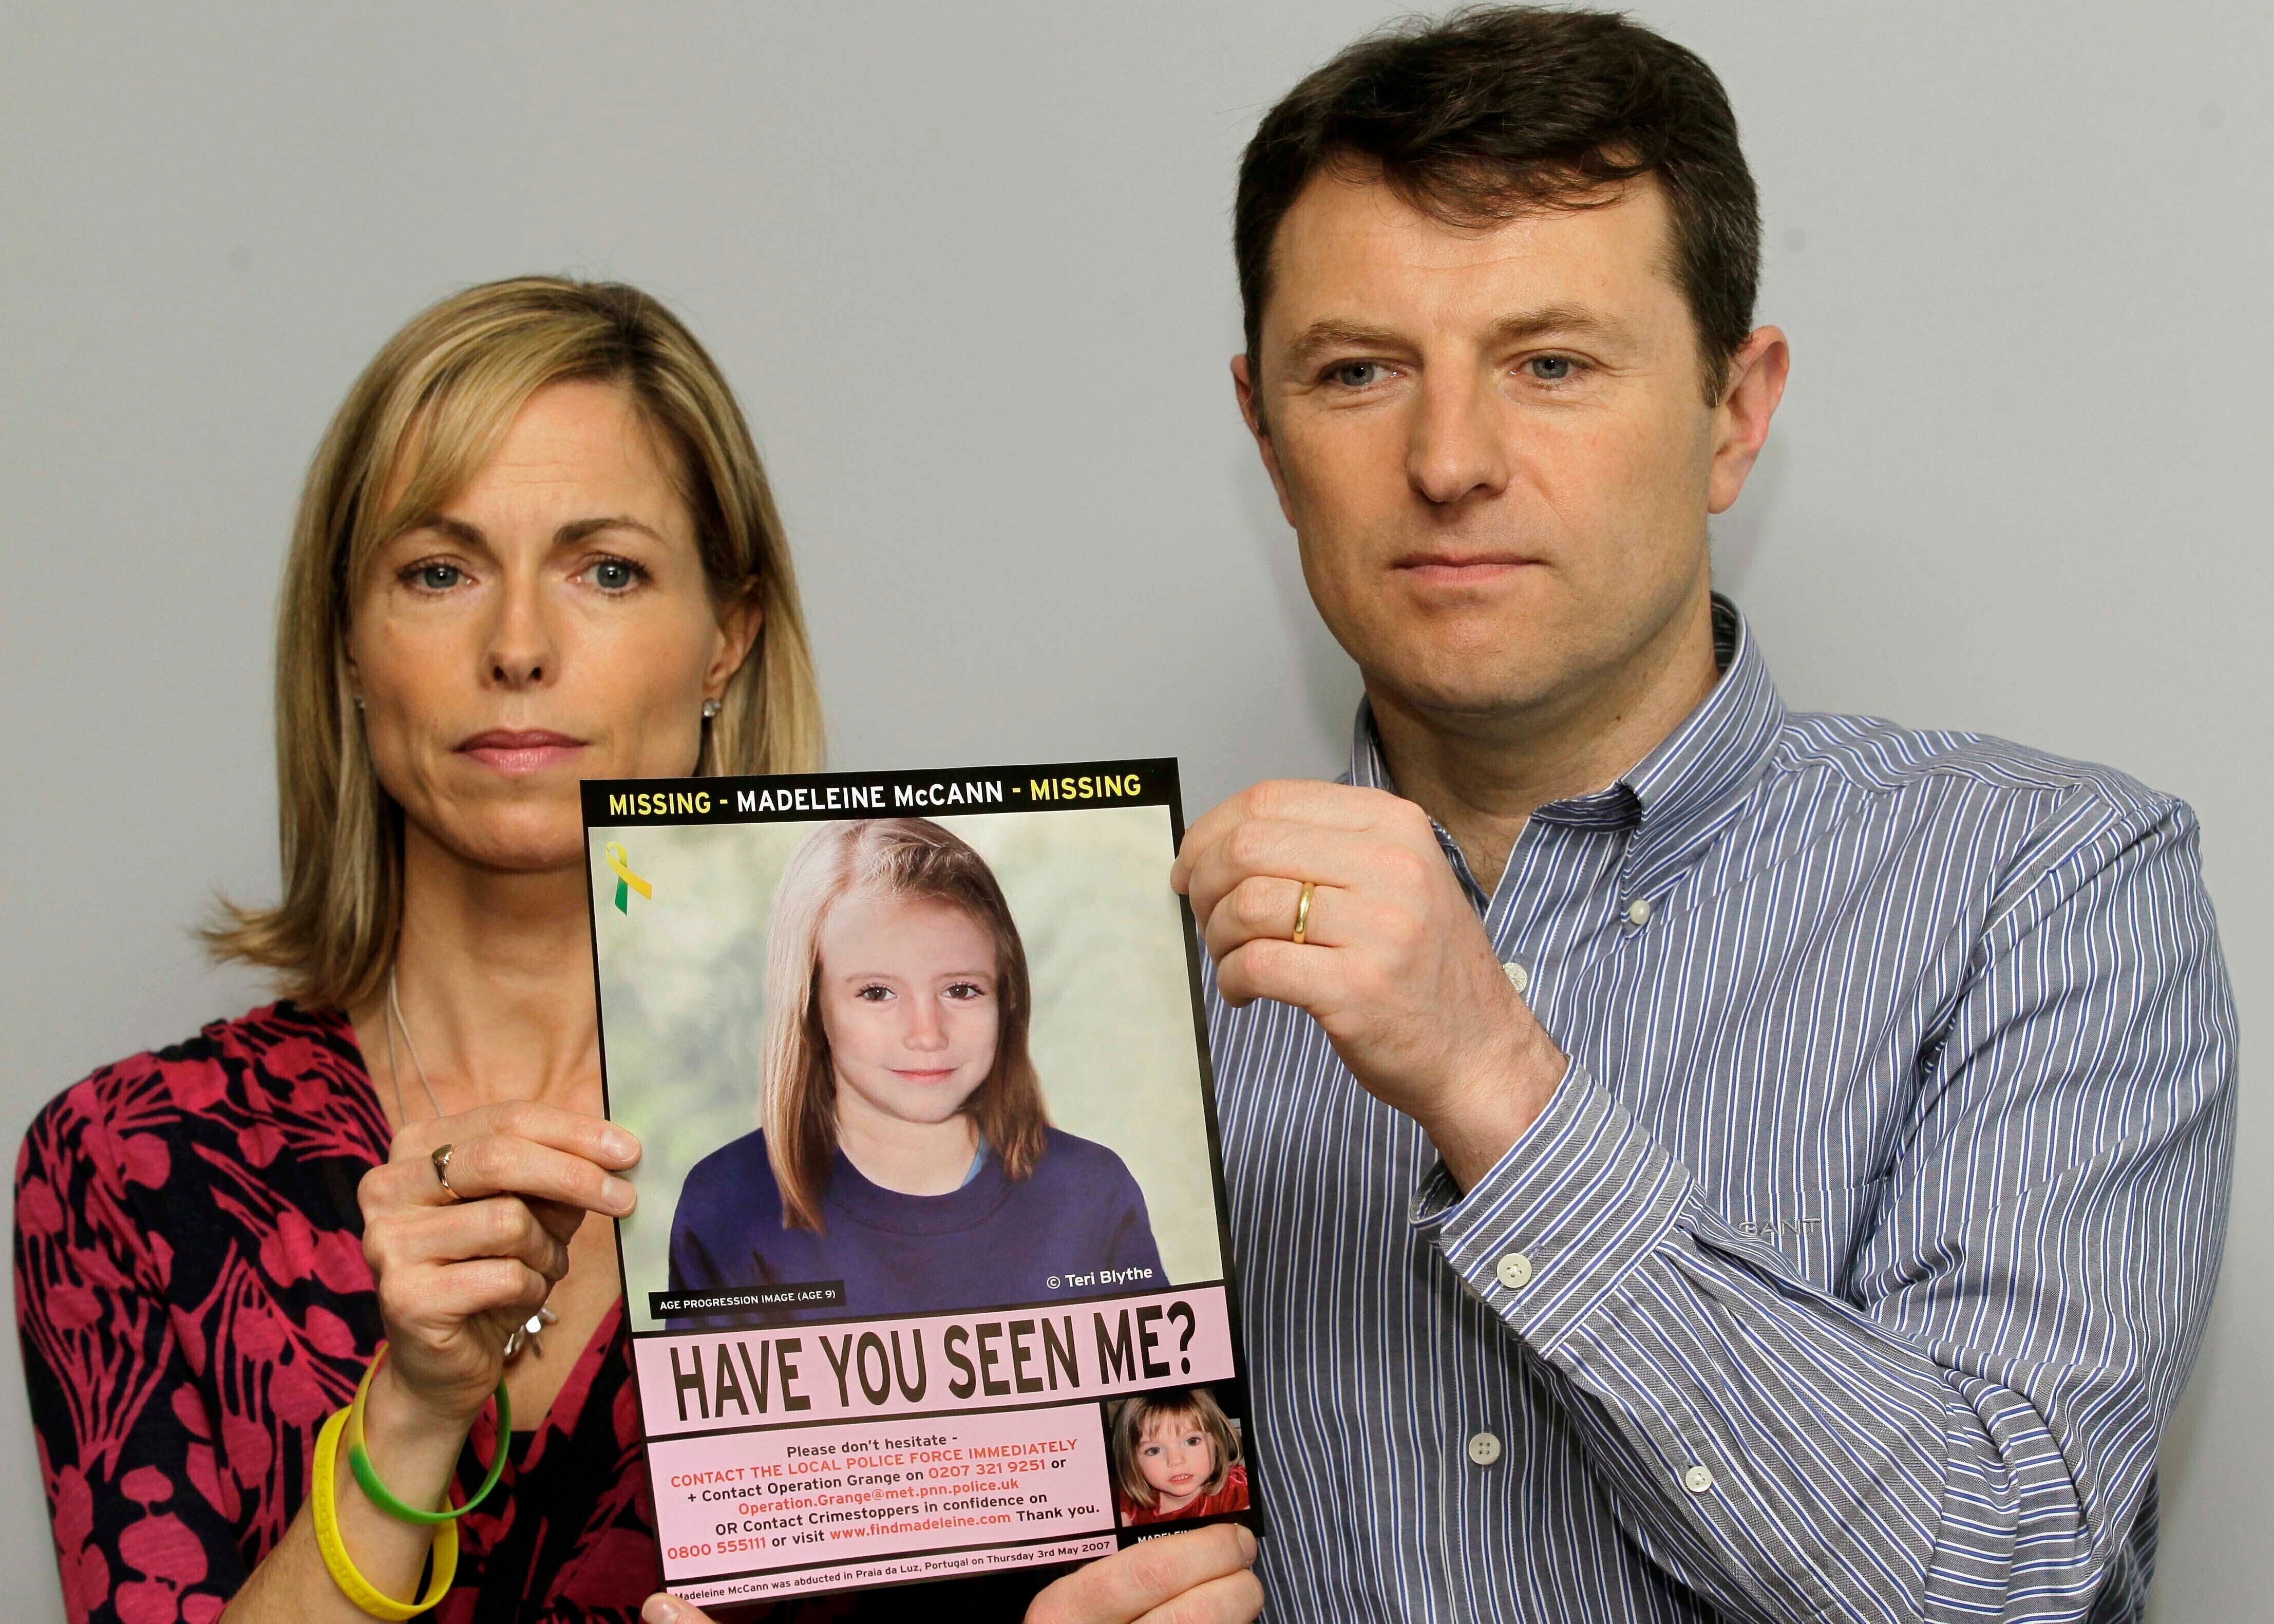 Madeleine McCann Where are the missing girls parents and twin siblings now? The Independent hq nude pic